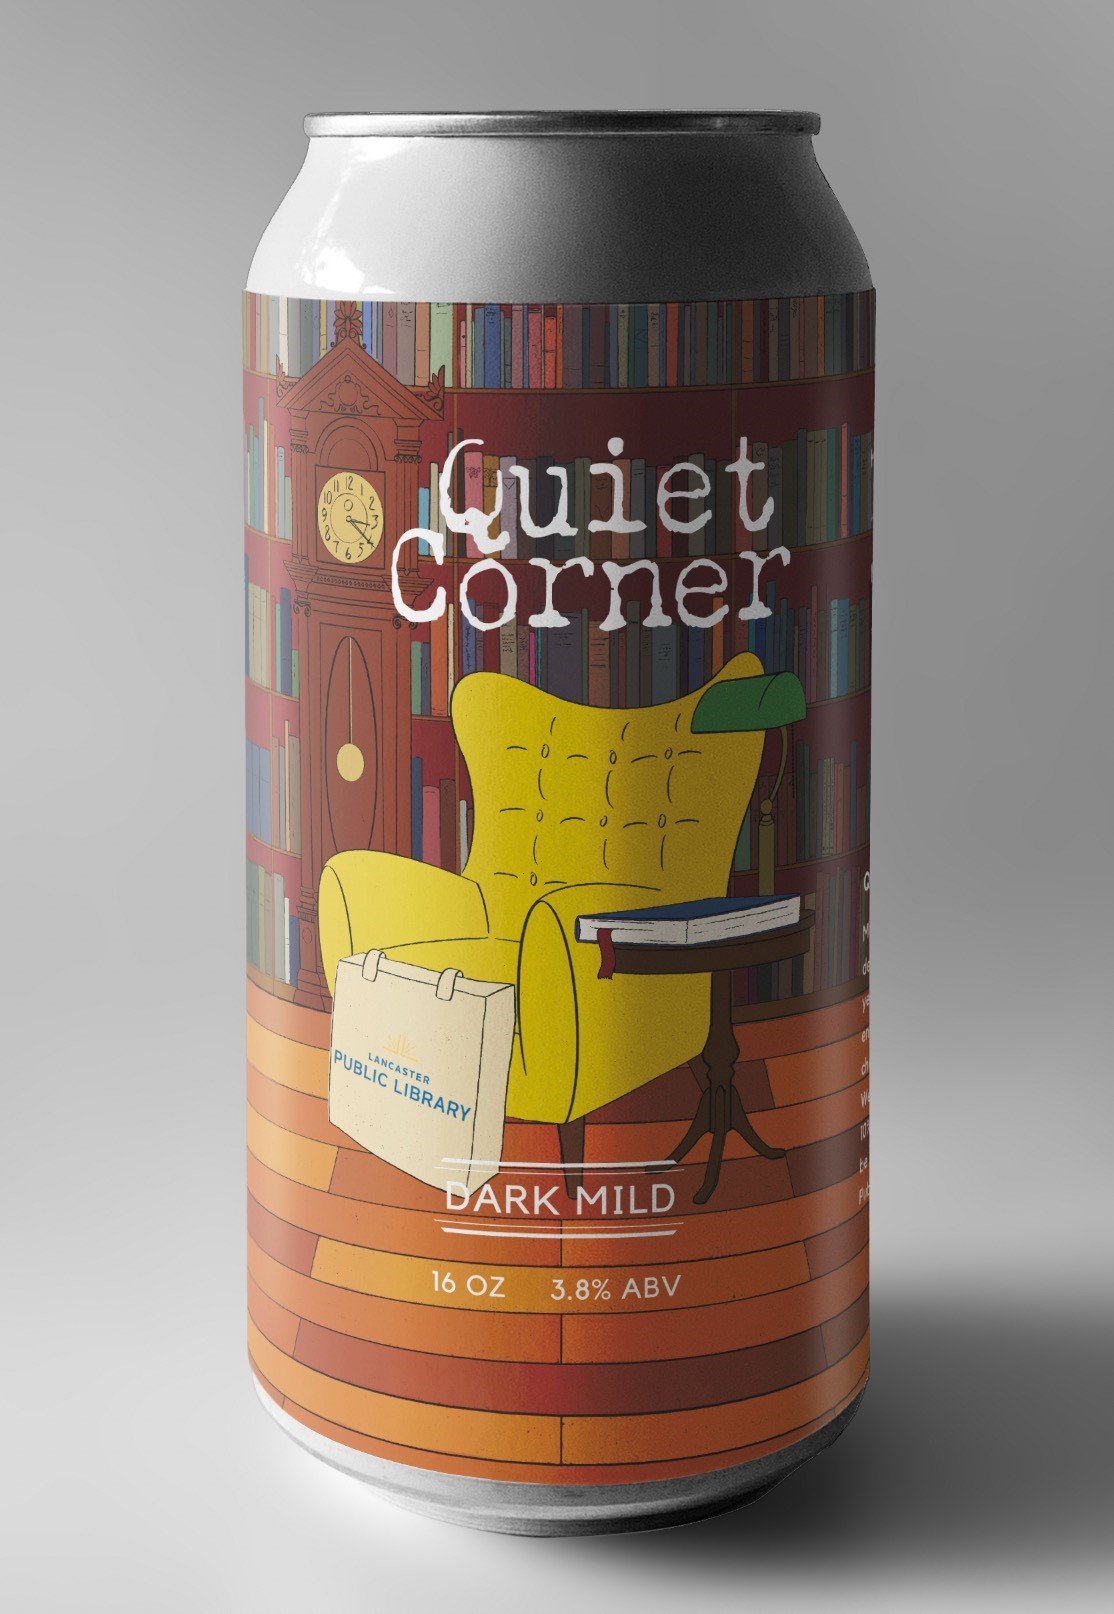 Can of beer decorated with bookshelves and a comfy yellow reading chair